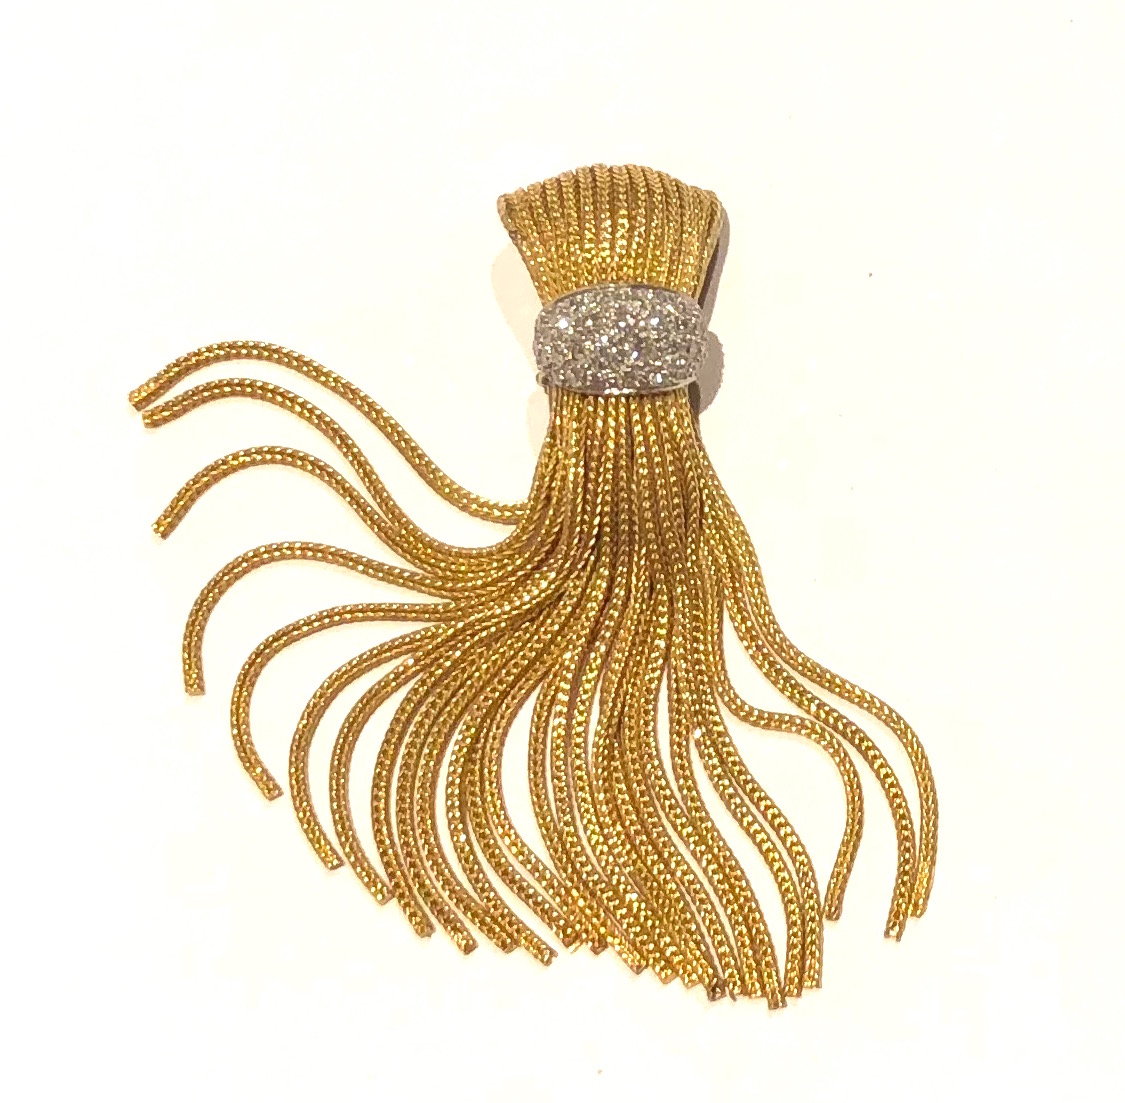 American “Tassel” brooch, 18K gold with diamonds (approx. 2 1/2 carats TW) set in platinum, marked and numbered, c. 1940’s